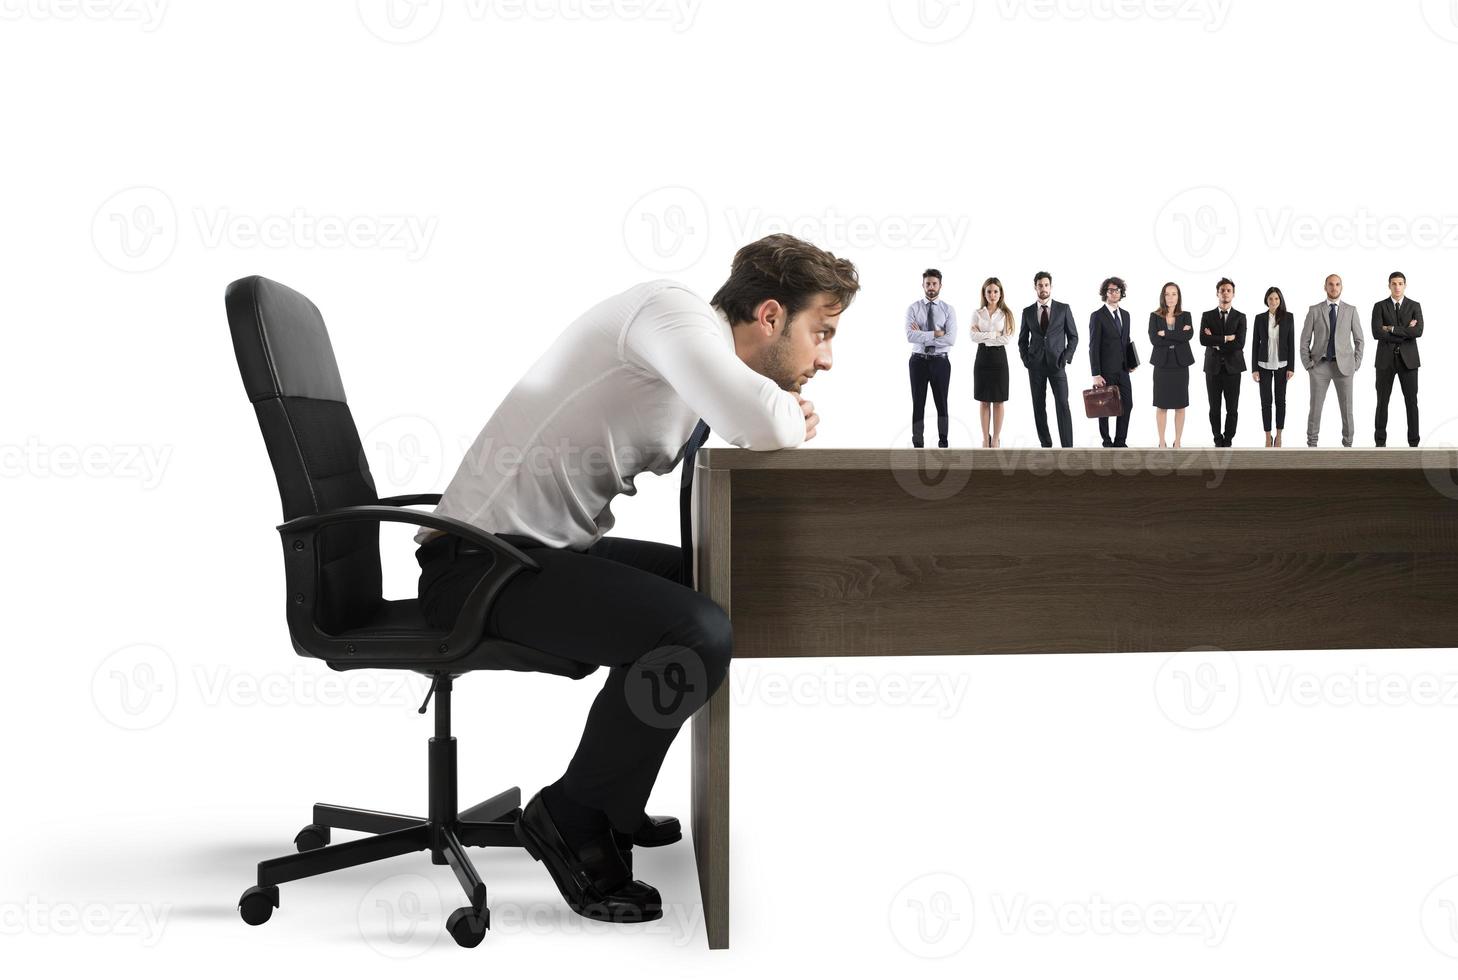 Boss selects suitable candidates to the workplace. Concept of recruitment and team photo